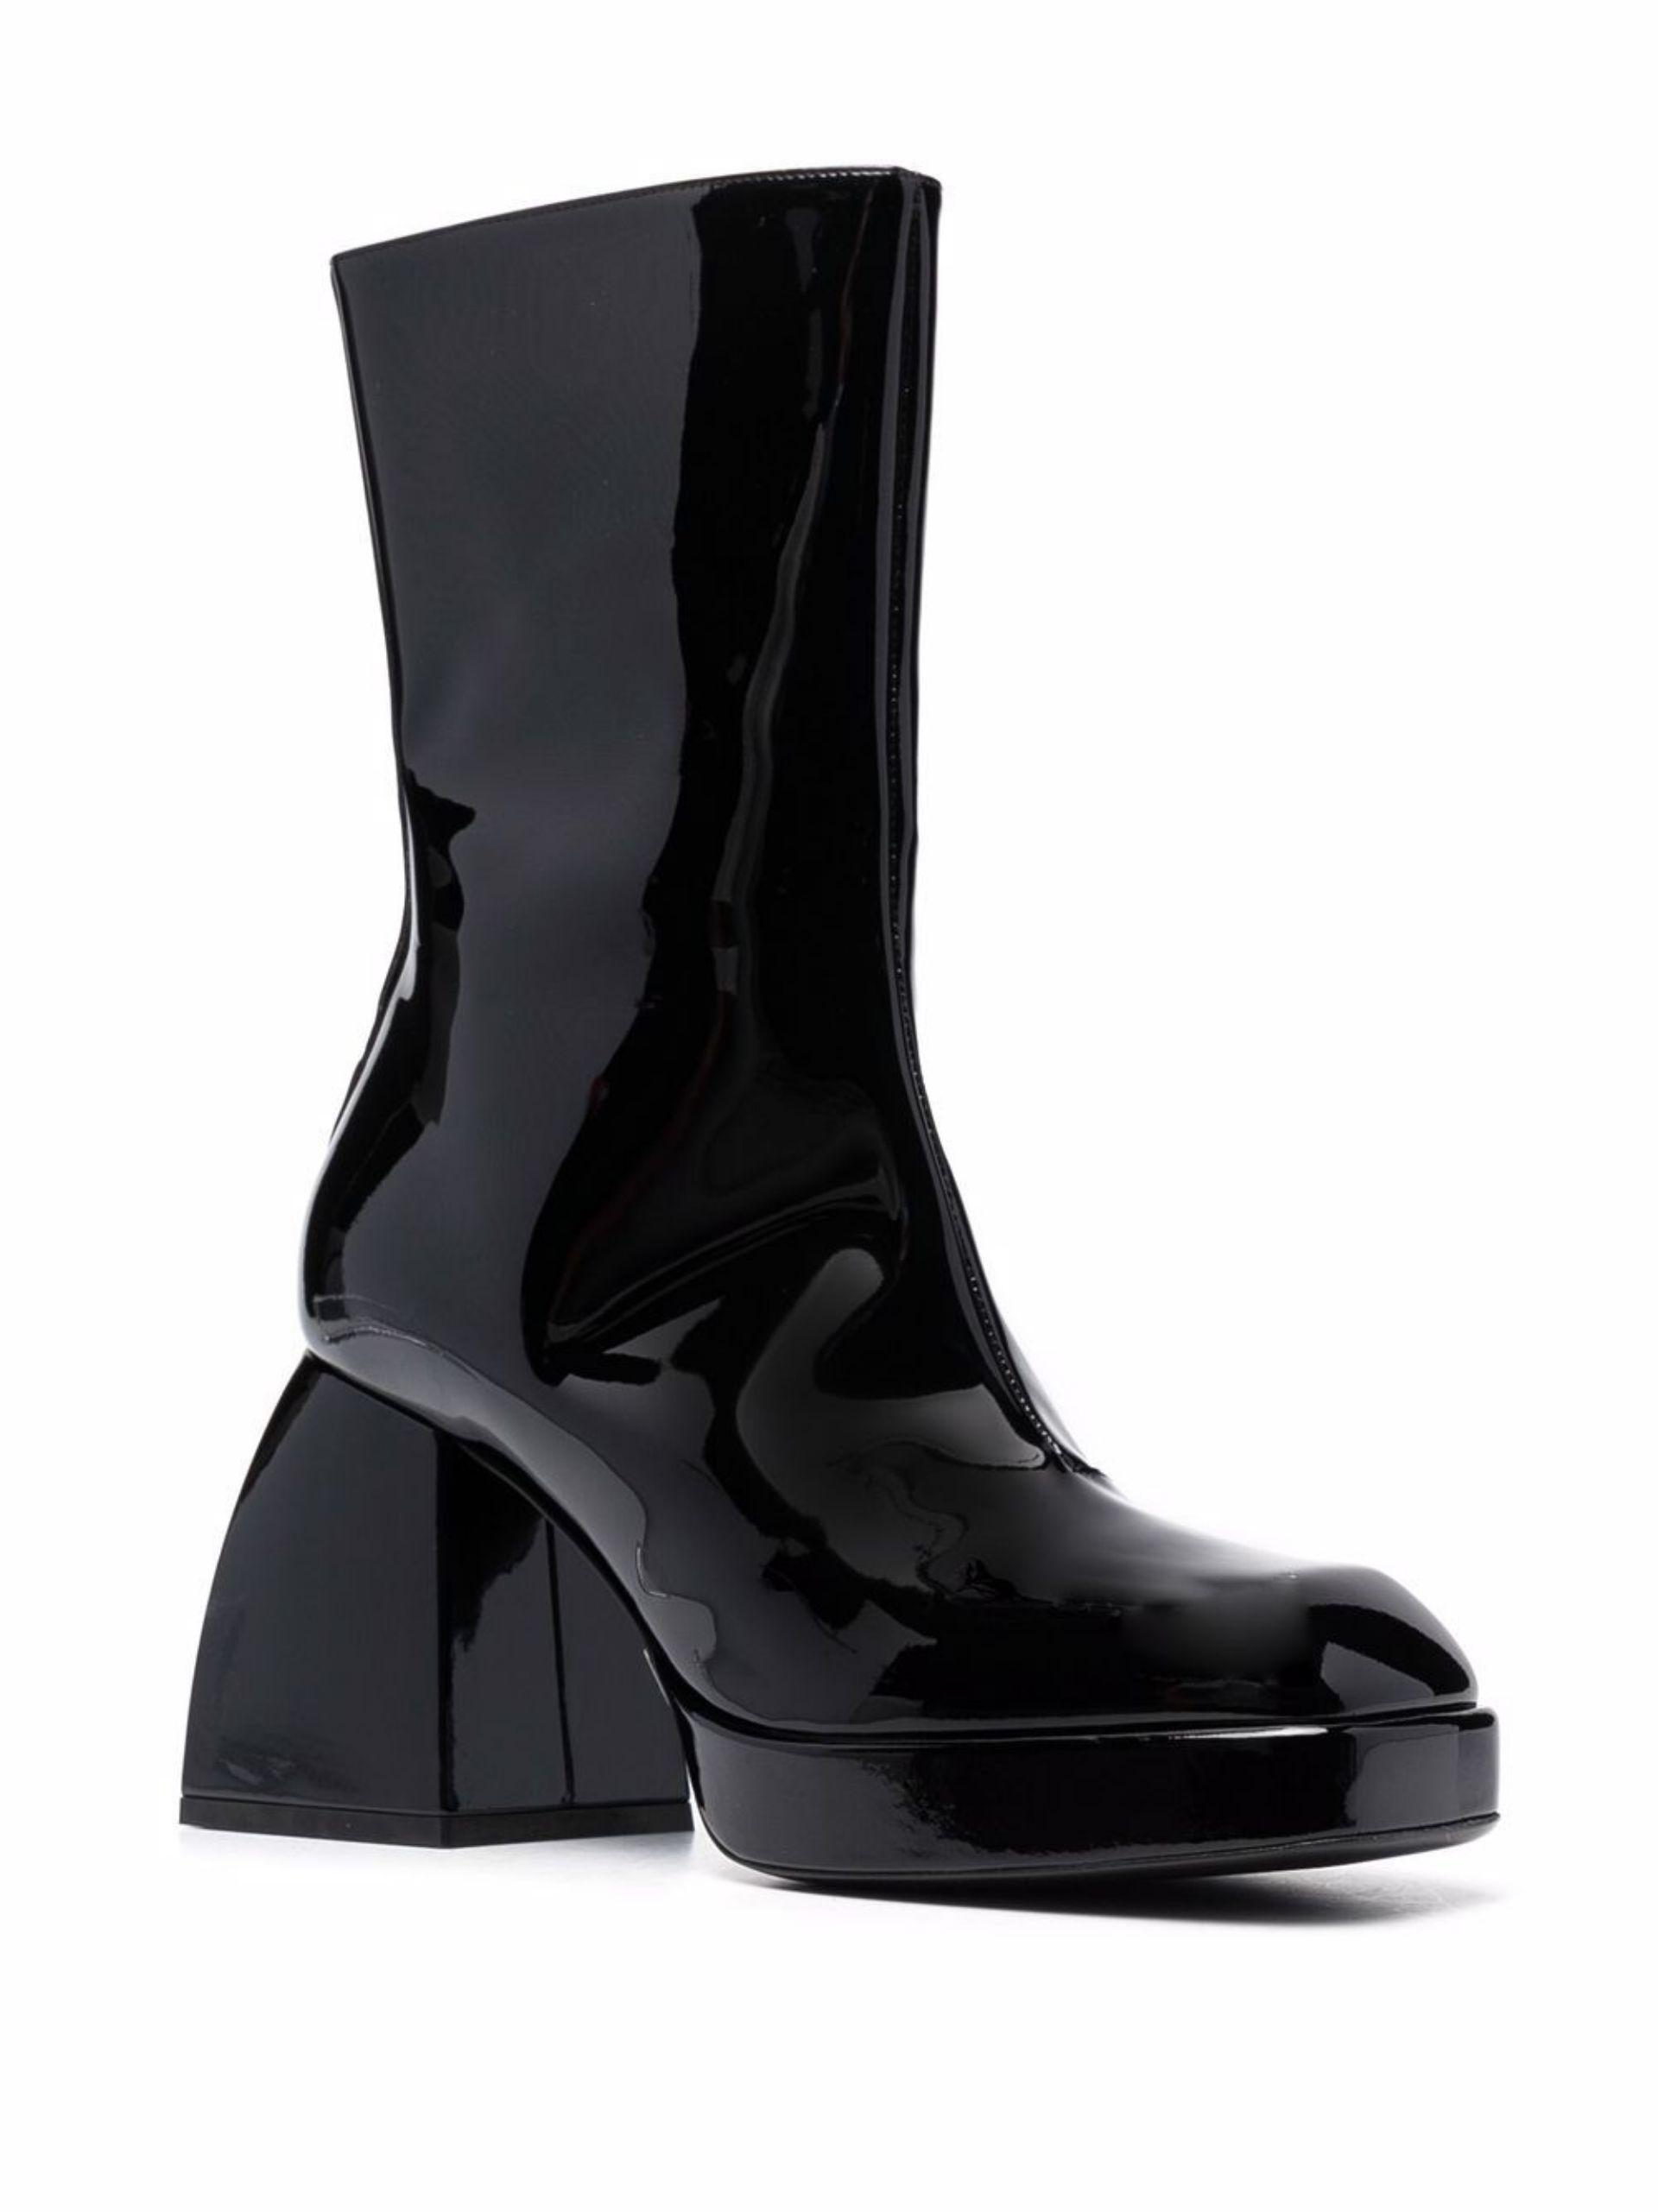 NODALETO Bulla Corta 85 Patent Leather Ankle Boots in Black | Lyst